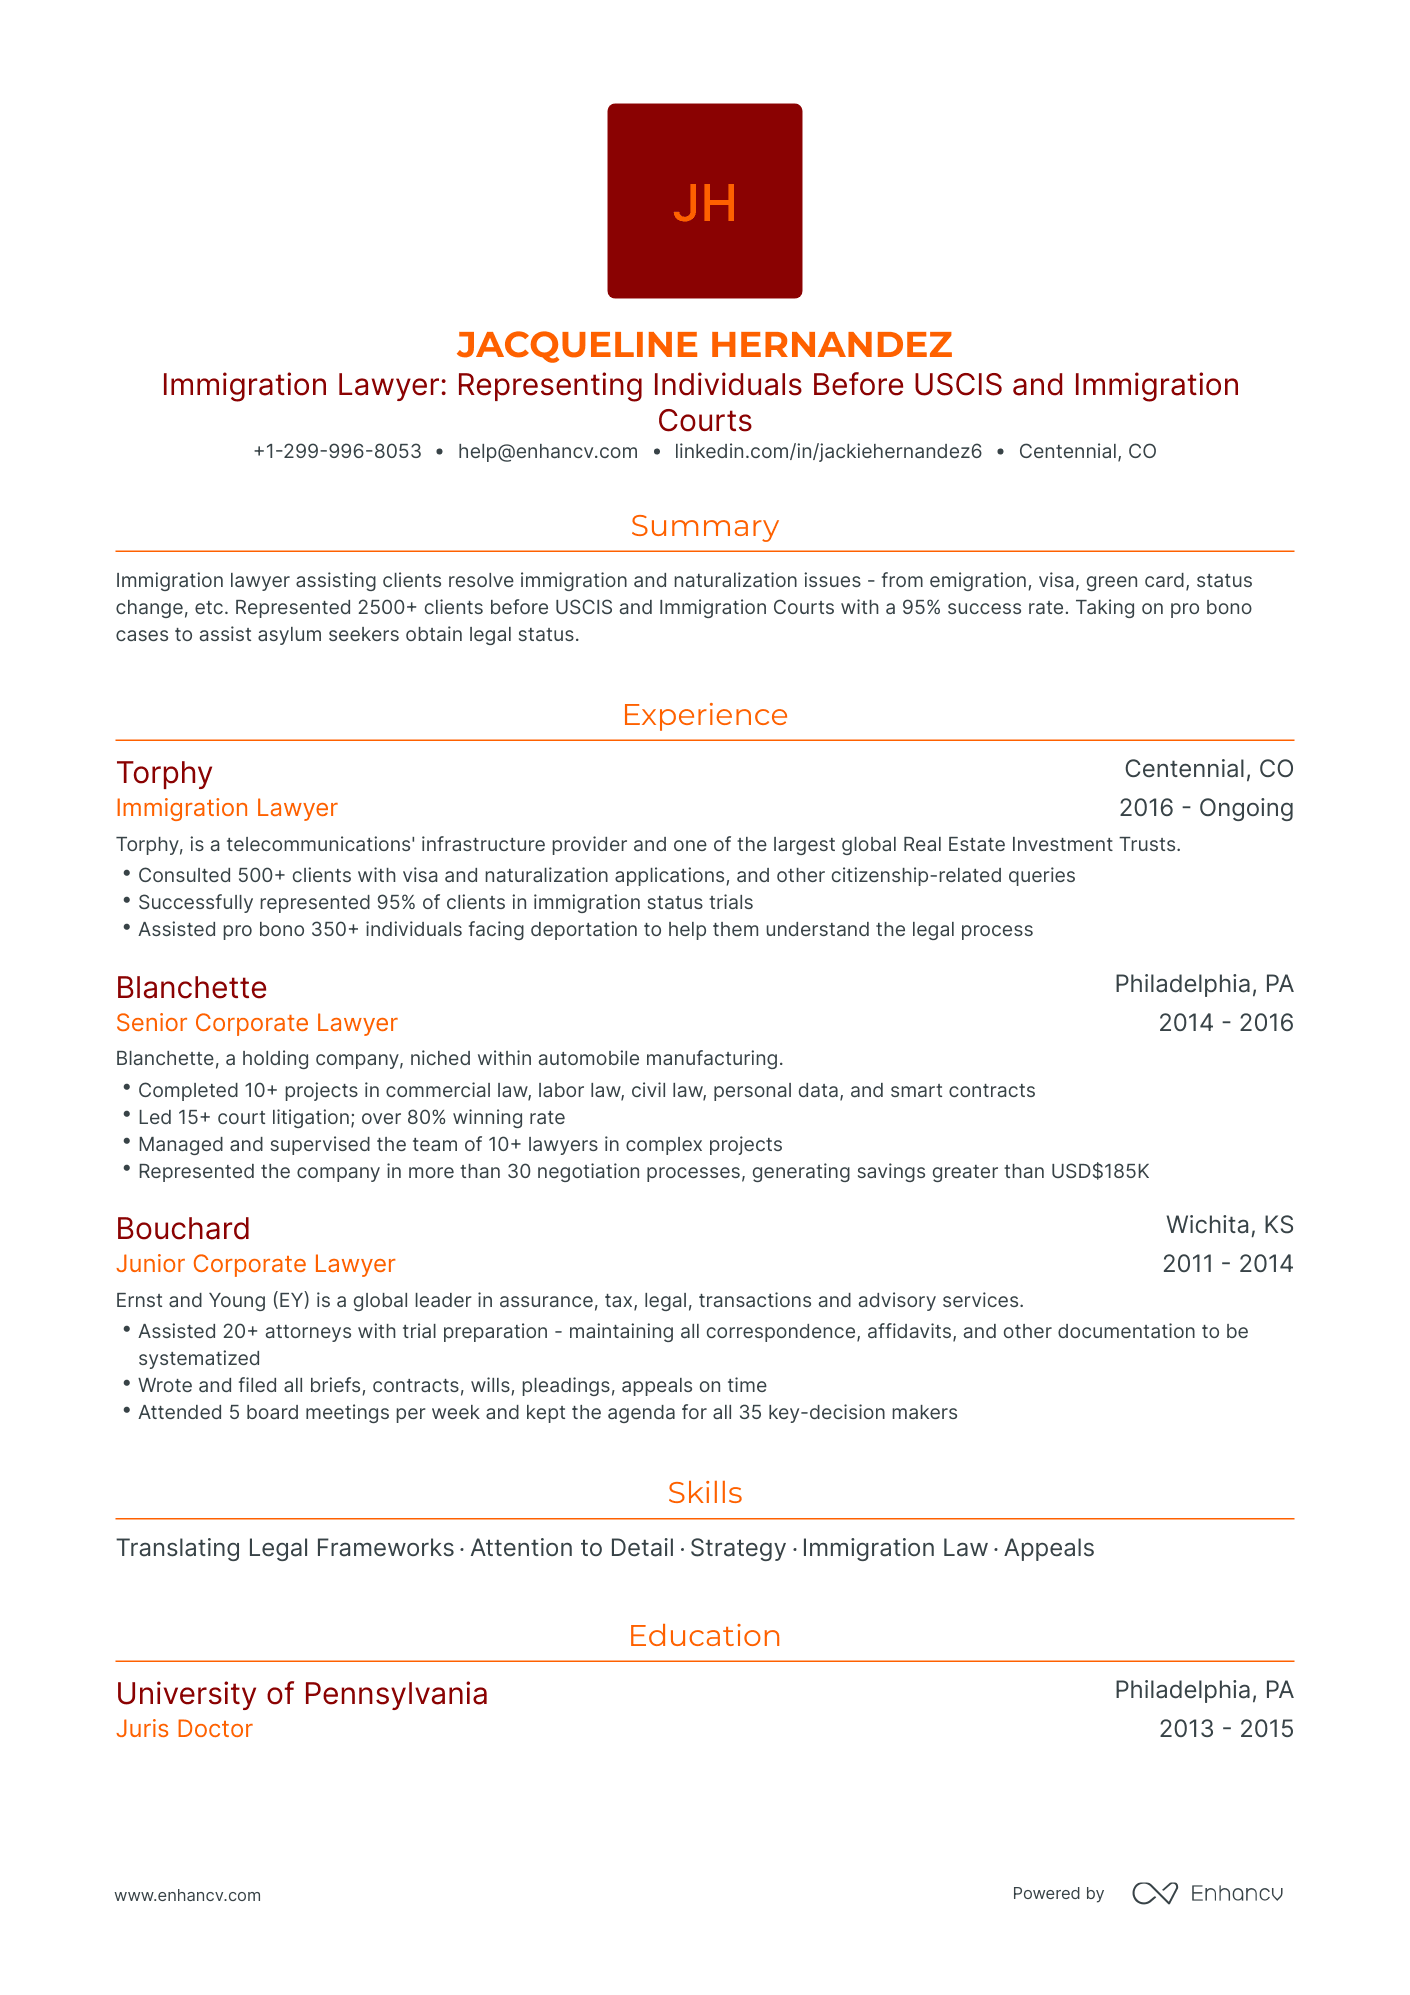 Traditional Immigration Lawyer Resume Template